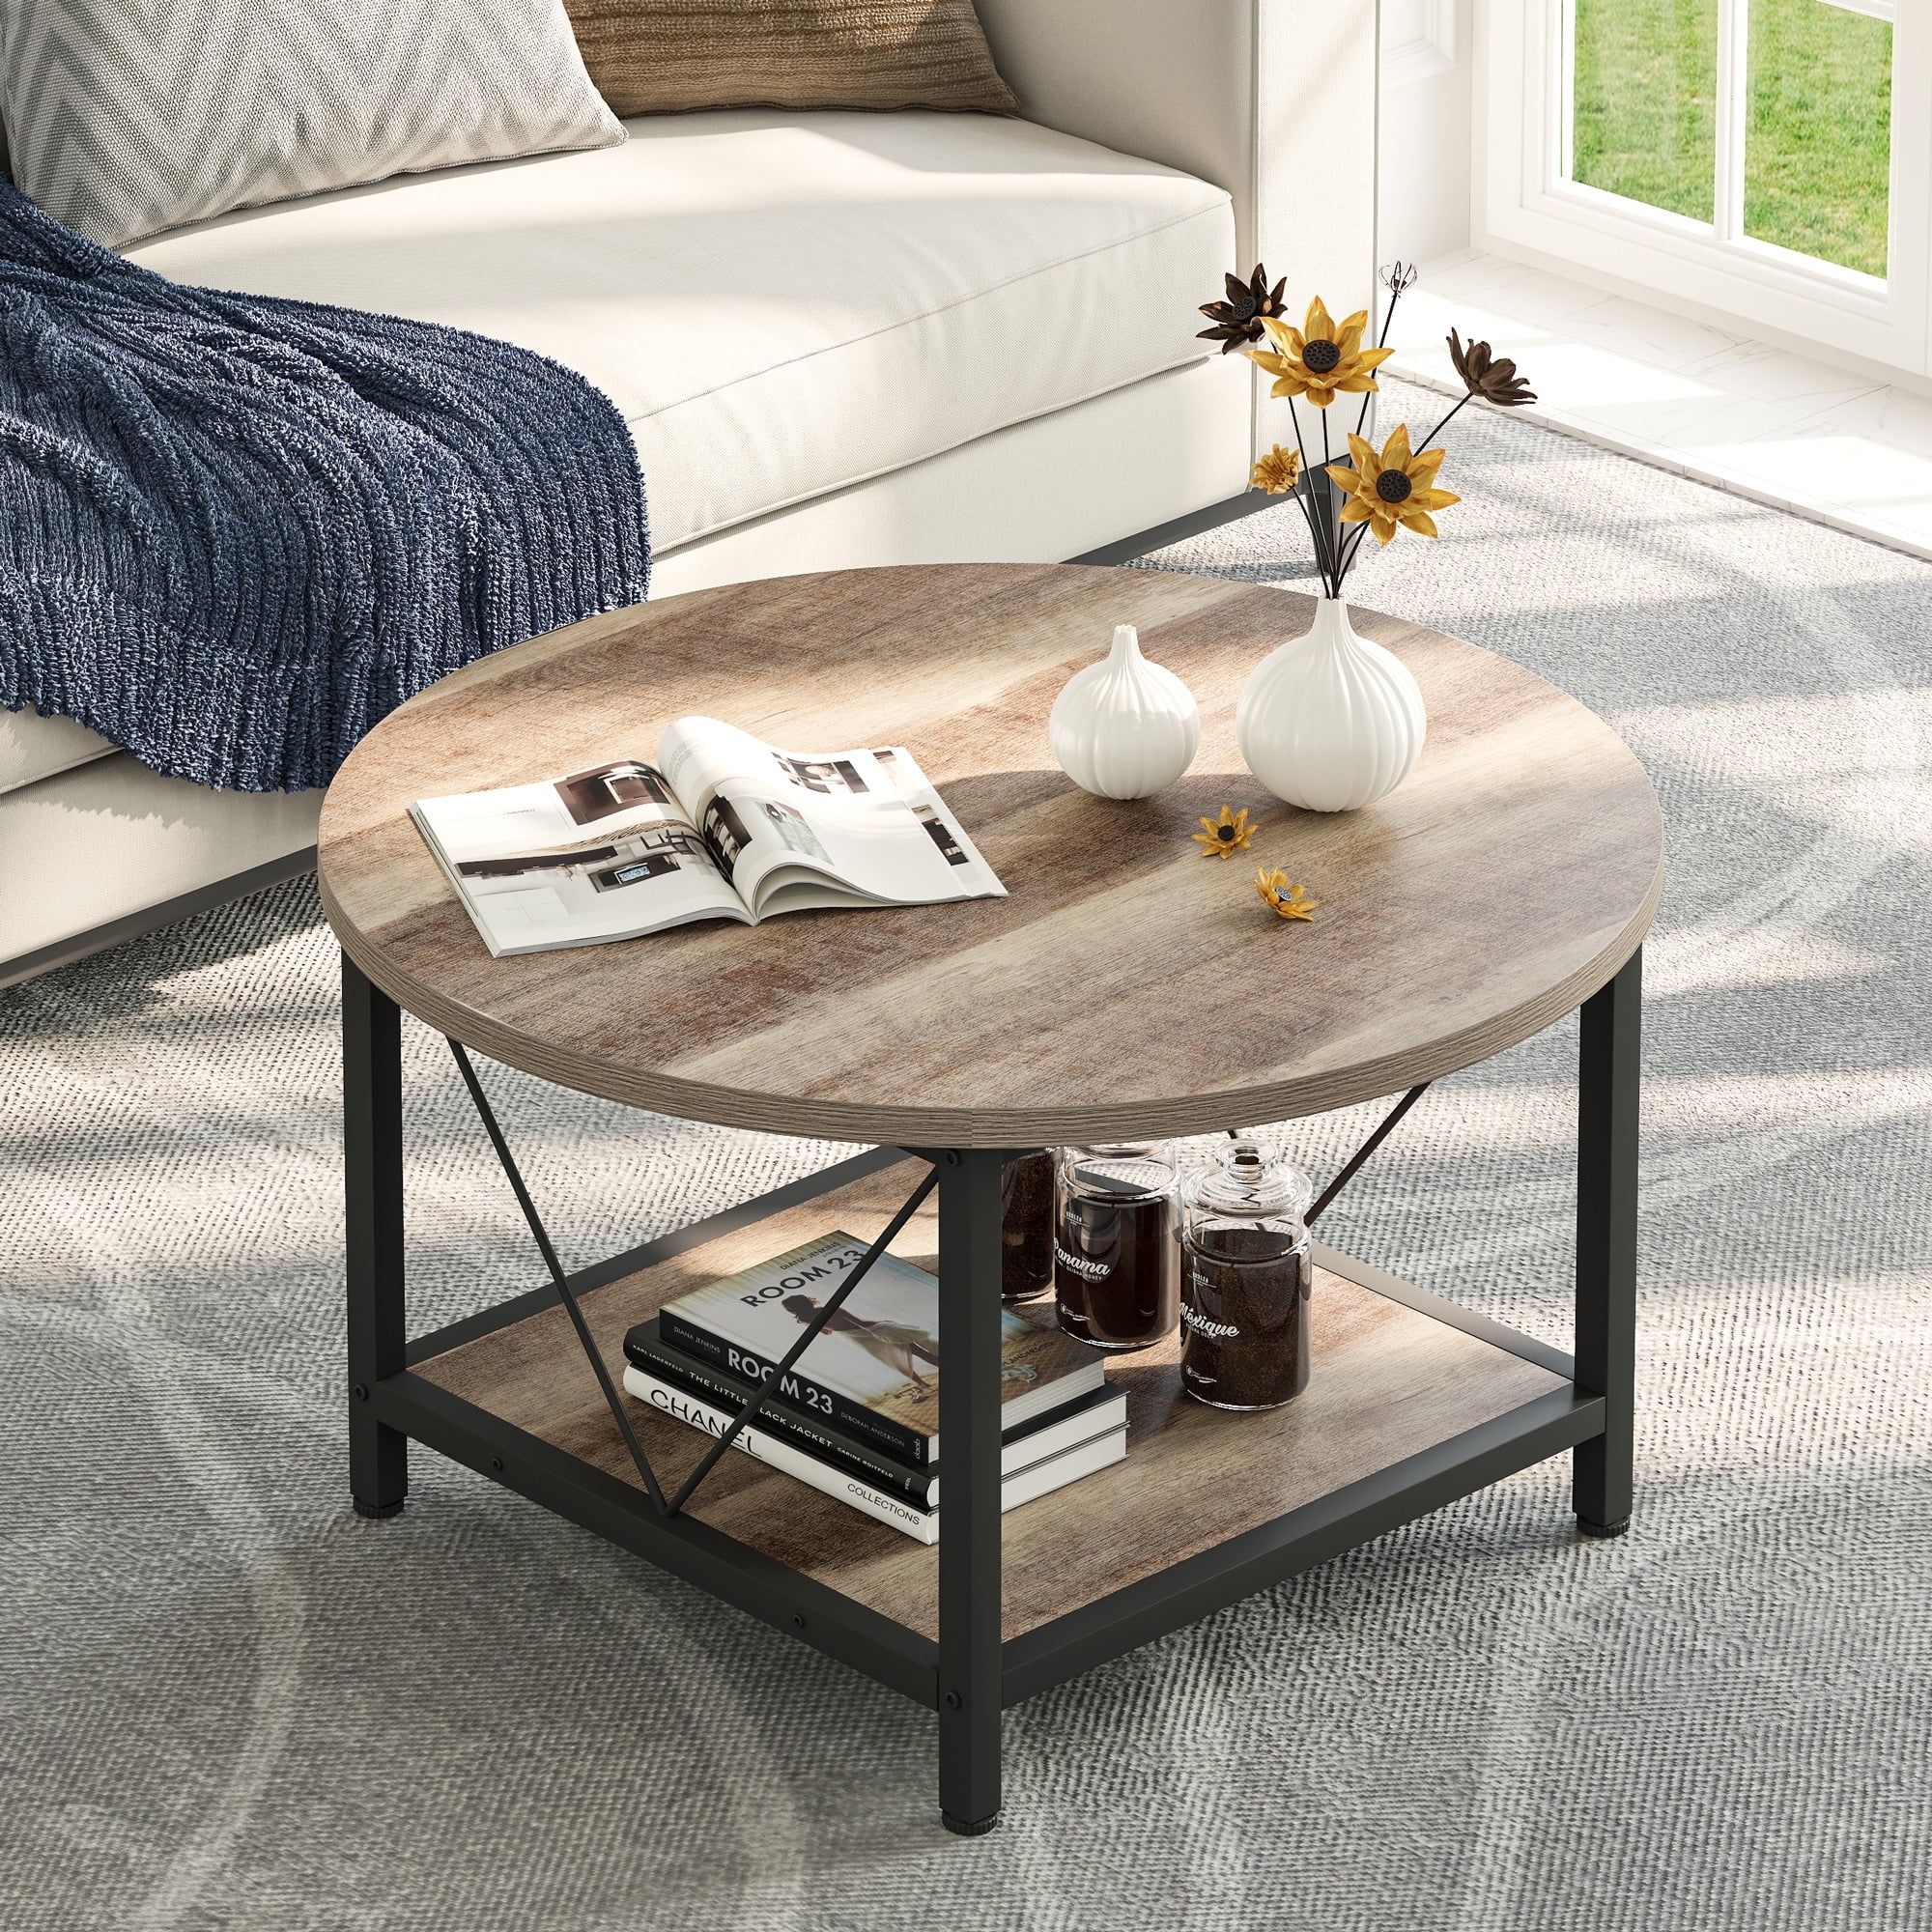 Dextrus Round Coffee Table With Storage, Rustic Living Room Tables With  Sturdy Metal Legs, Gray Wash – Walmart Pertaining To Round Coffee Tables With Storage (View 5 of 15)